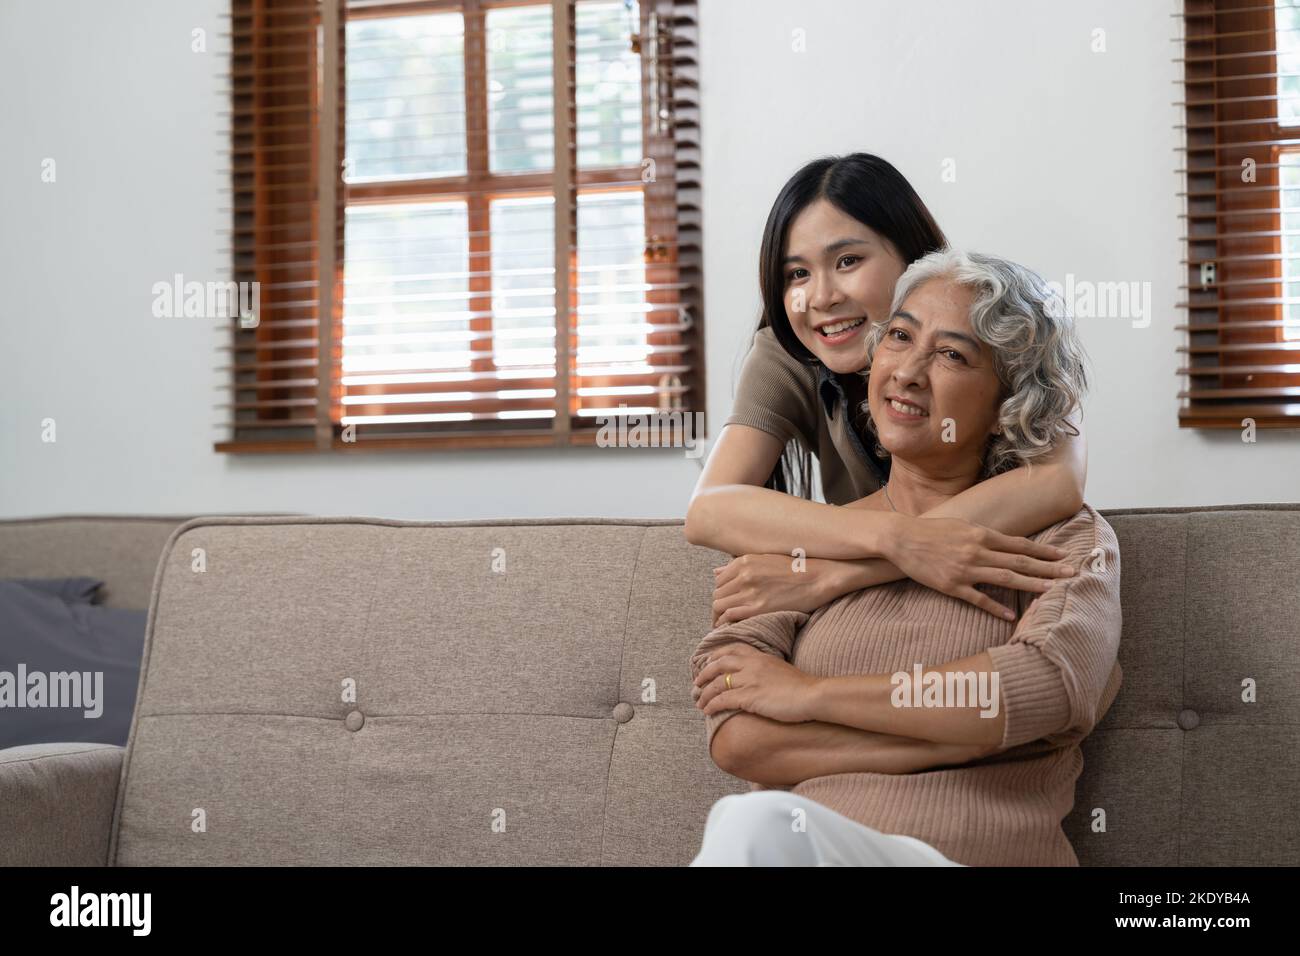 smiling grownup daughter hugging older mother. two generations concept, beautiful young woman embracing mature woman, posing for photo together. Stock Photo